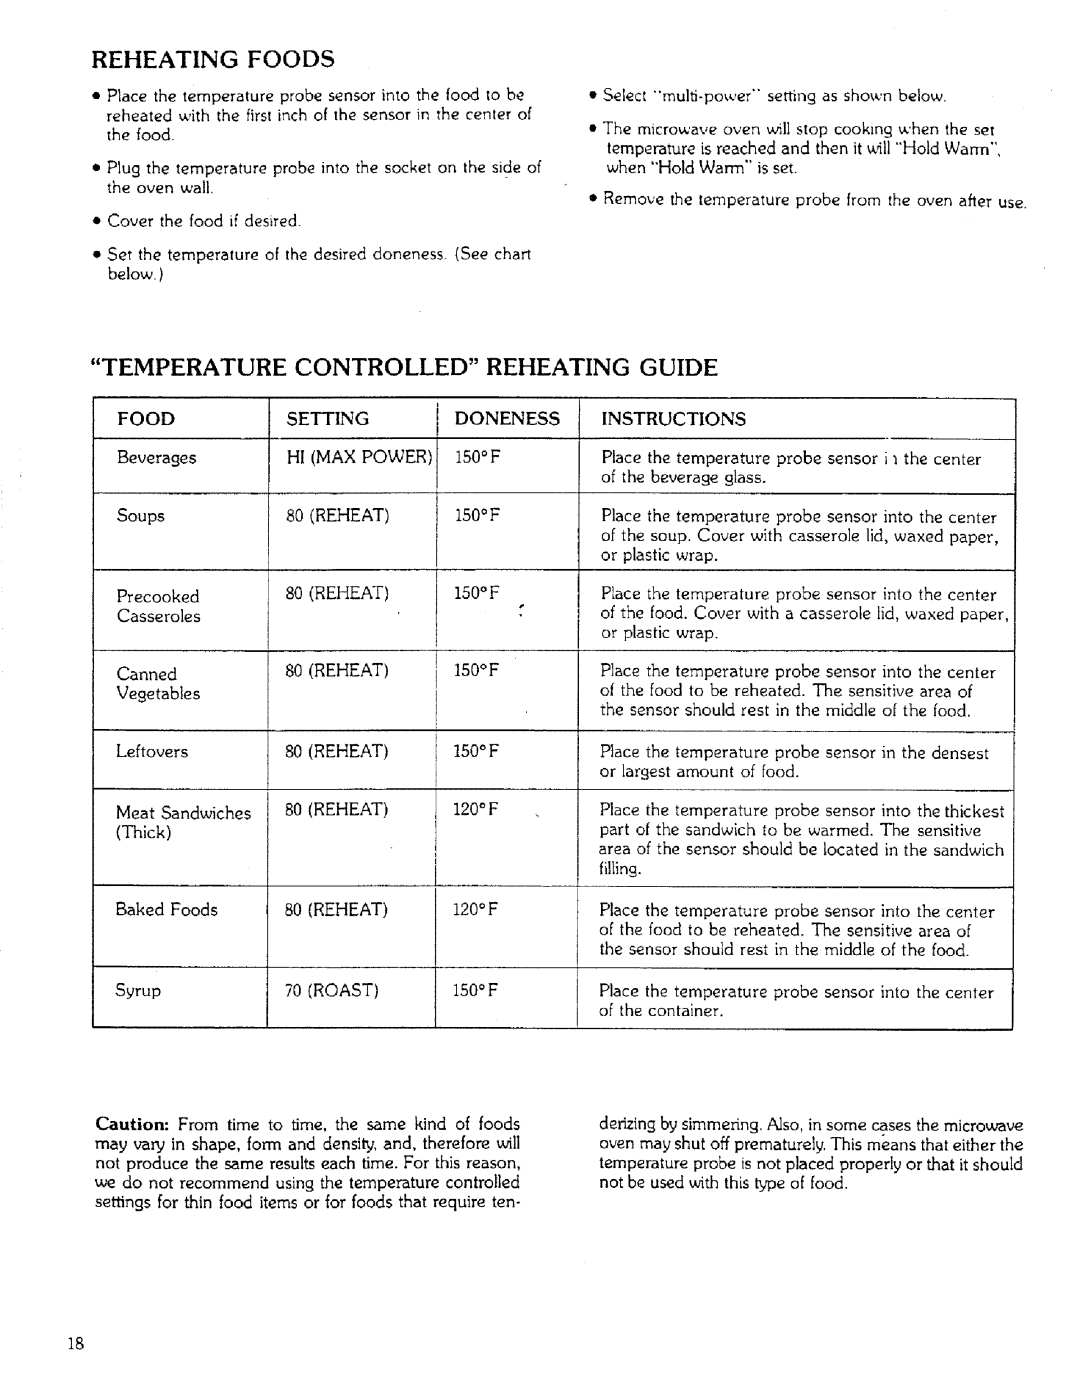 Sears 85951 manual Reheating Foods, Temperature, Controlled, Guide, Thick 